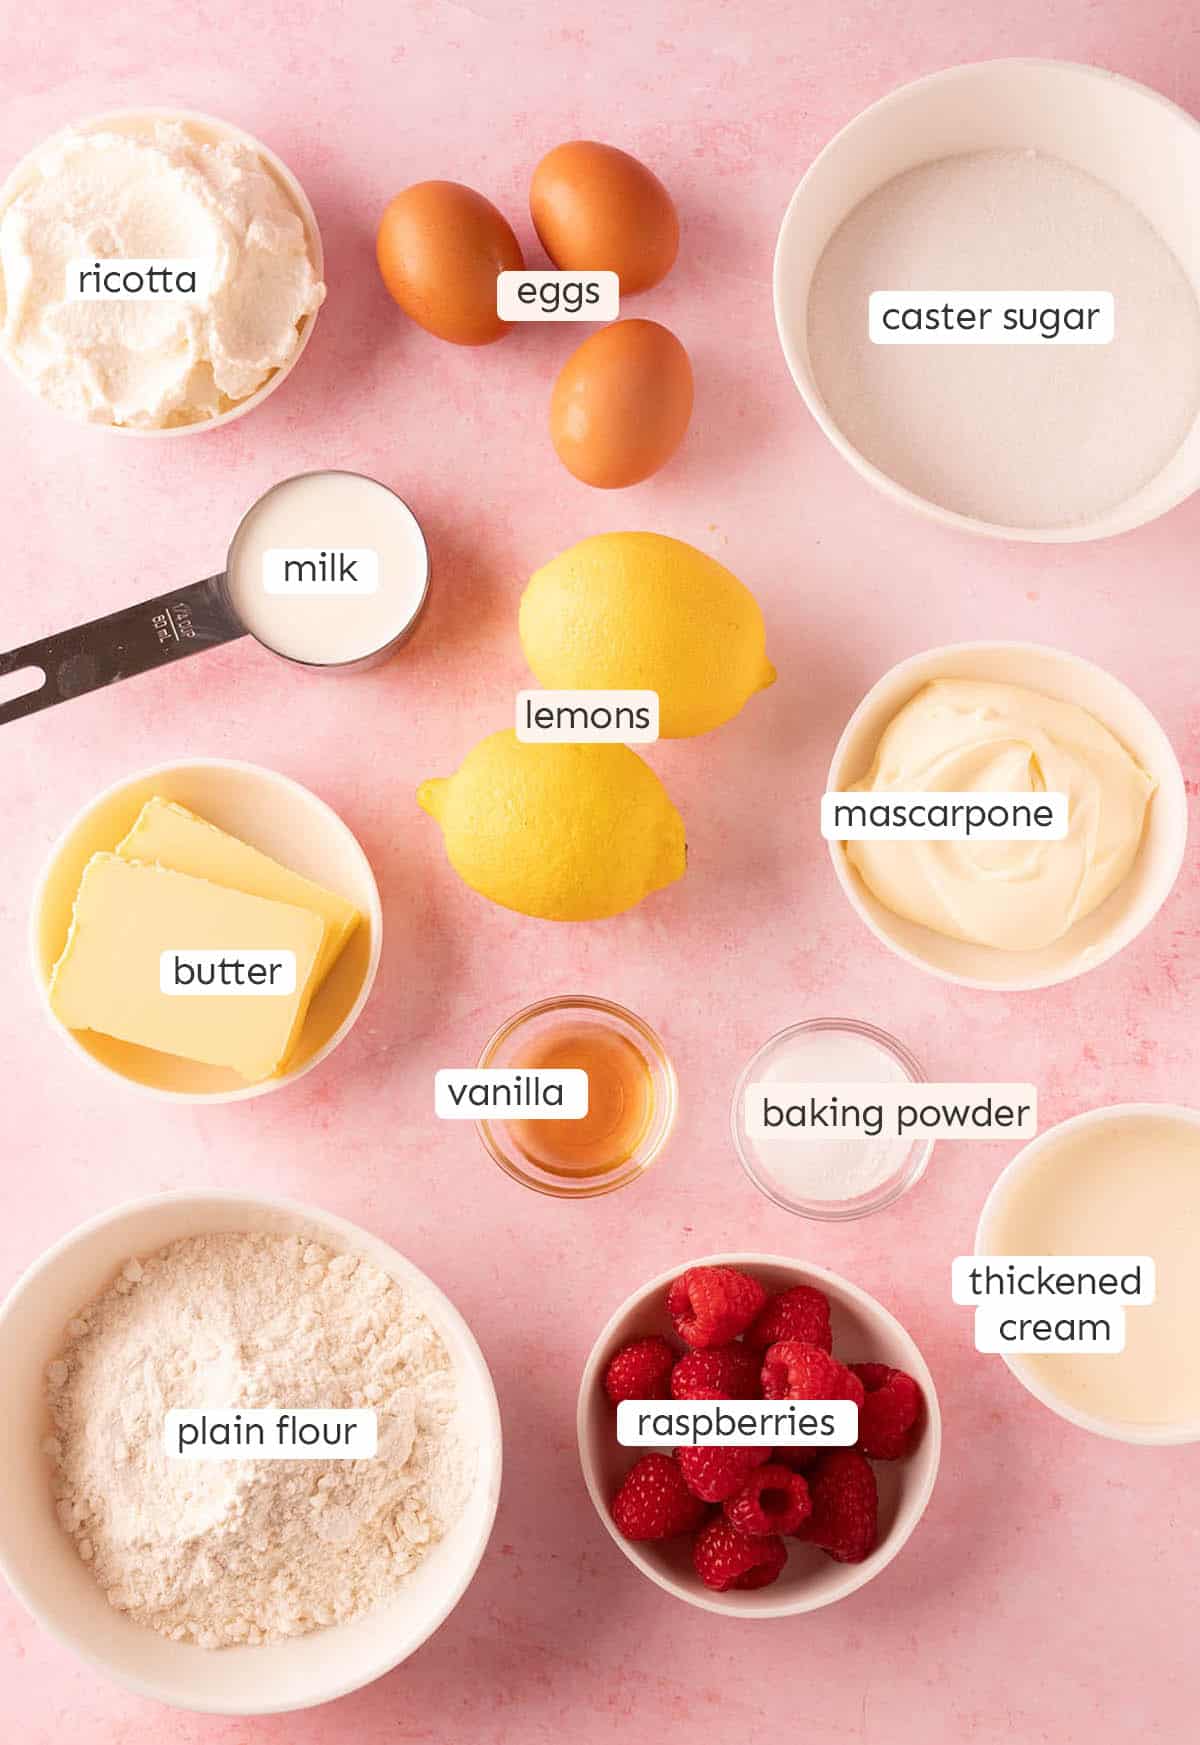 All the ingredients needed to make Lemon Ricotta Cake from scratch.